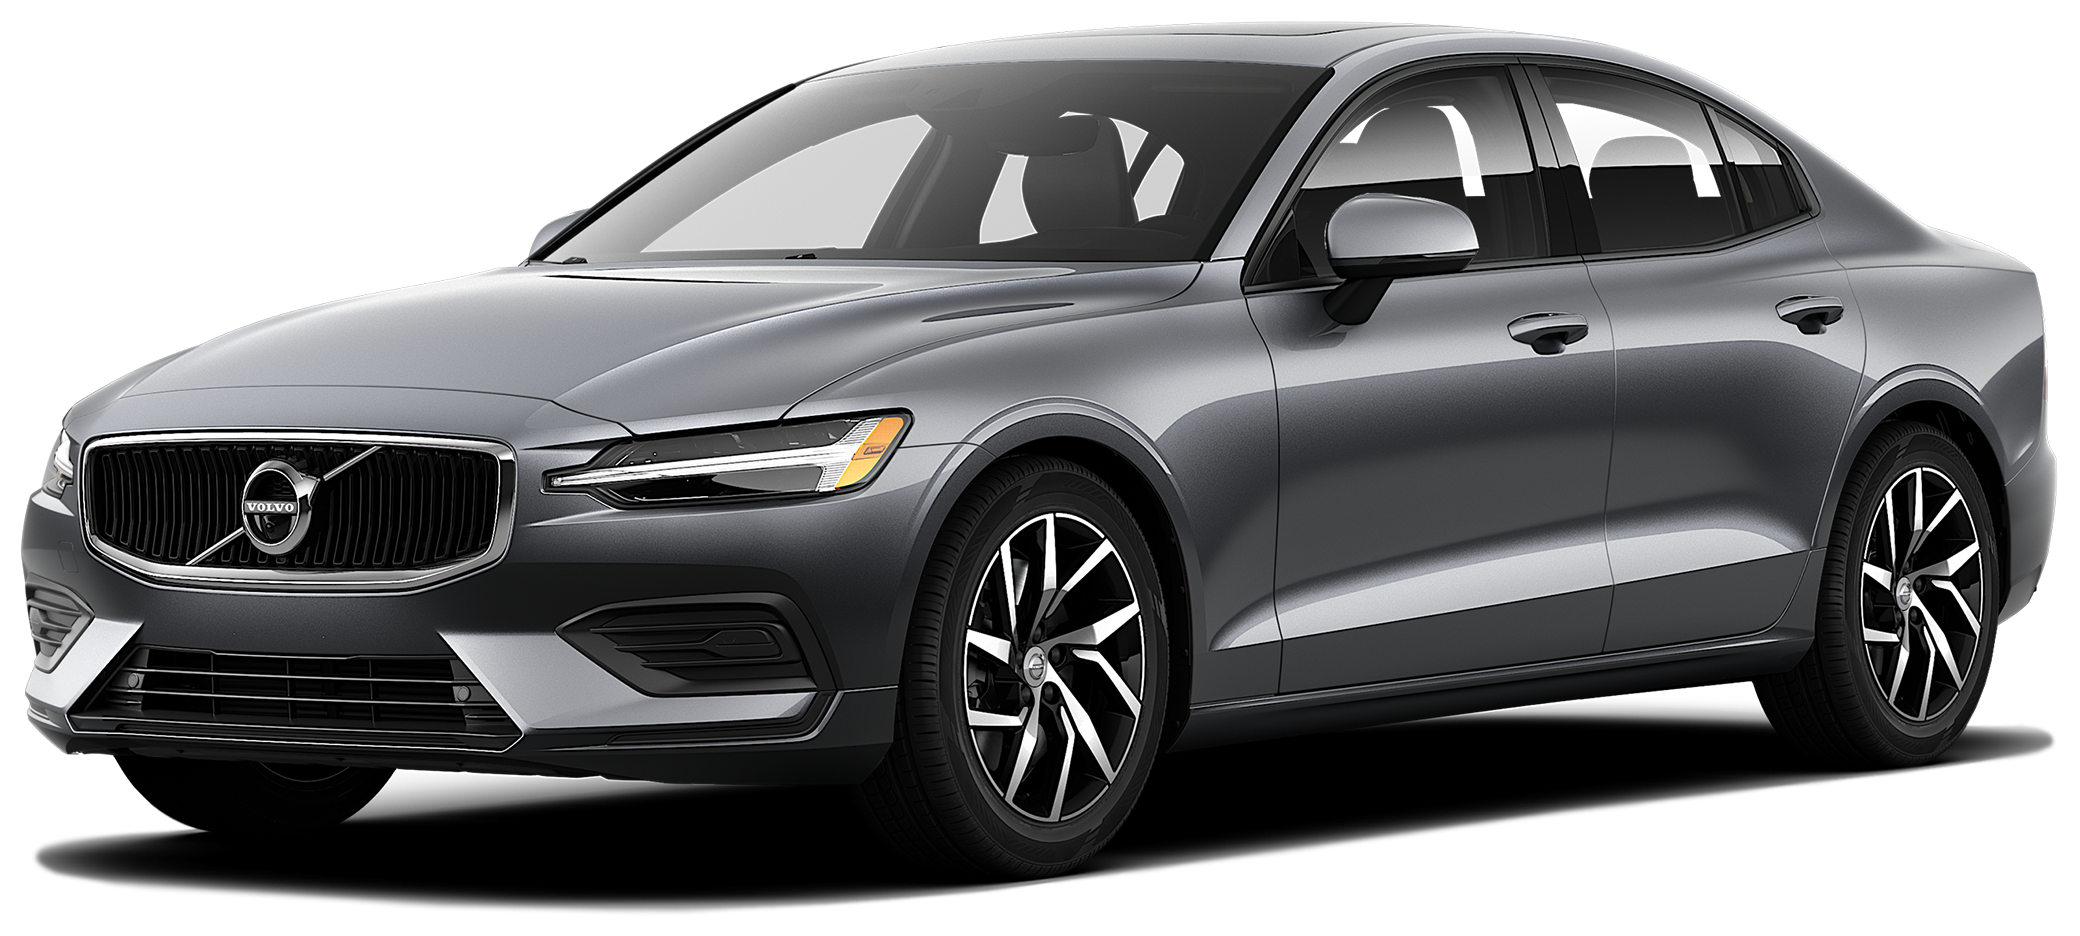 2020 Volvo S60 Incentives, Specials & Offers in Elmsford NY
